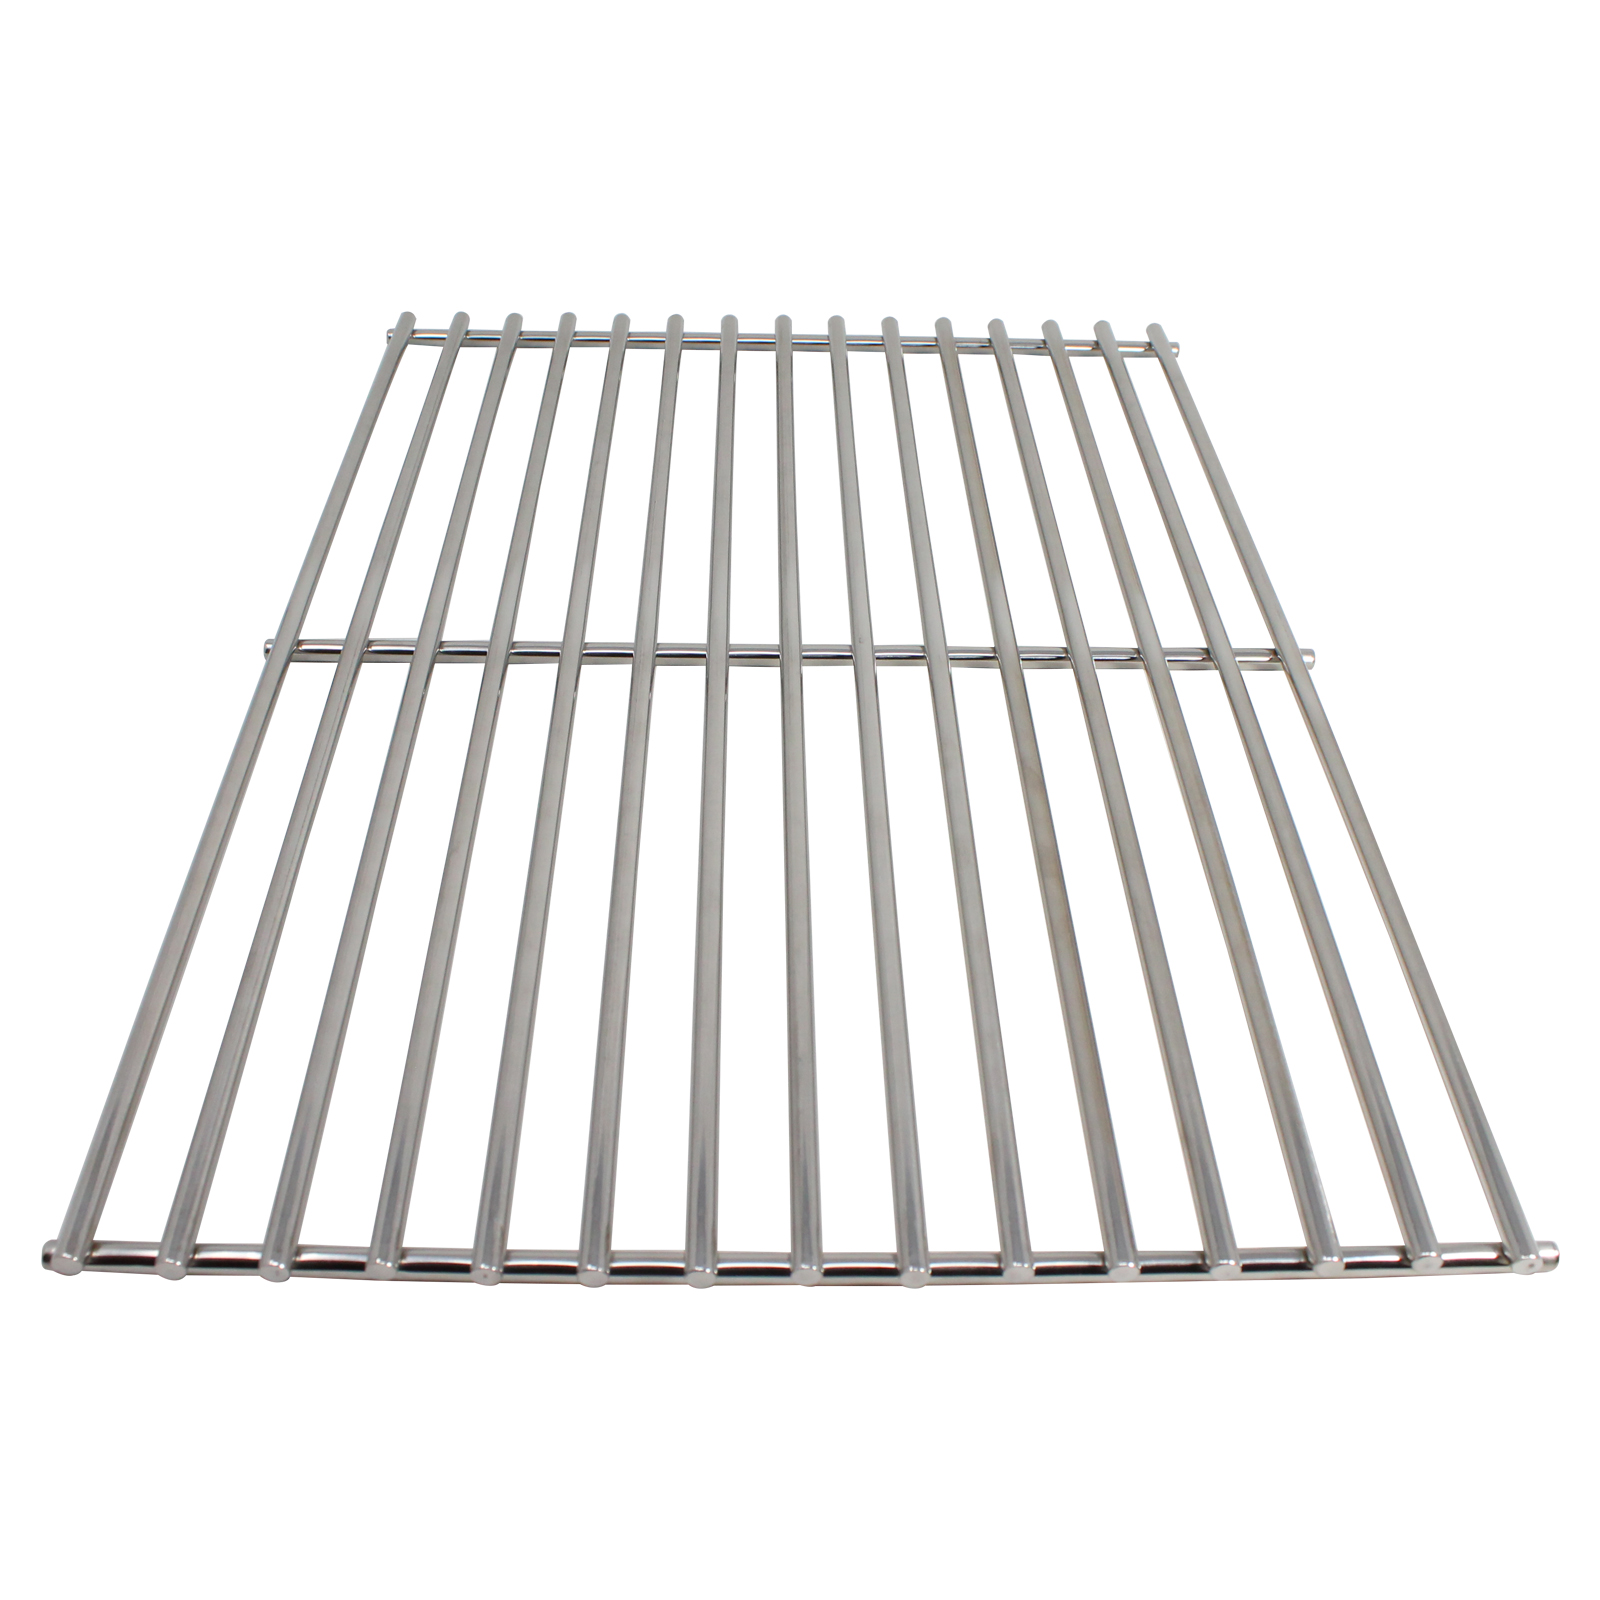 2-Pack BBQ Grill Cooking Grates Replacement Parts for Coleman G52203 - Compatible Barbeque Grid 18 1/4" - image 3 of 4